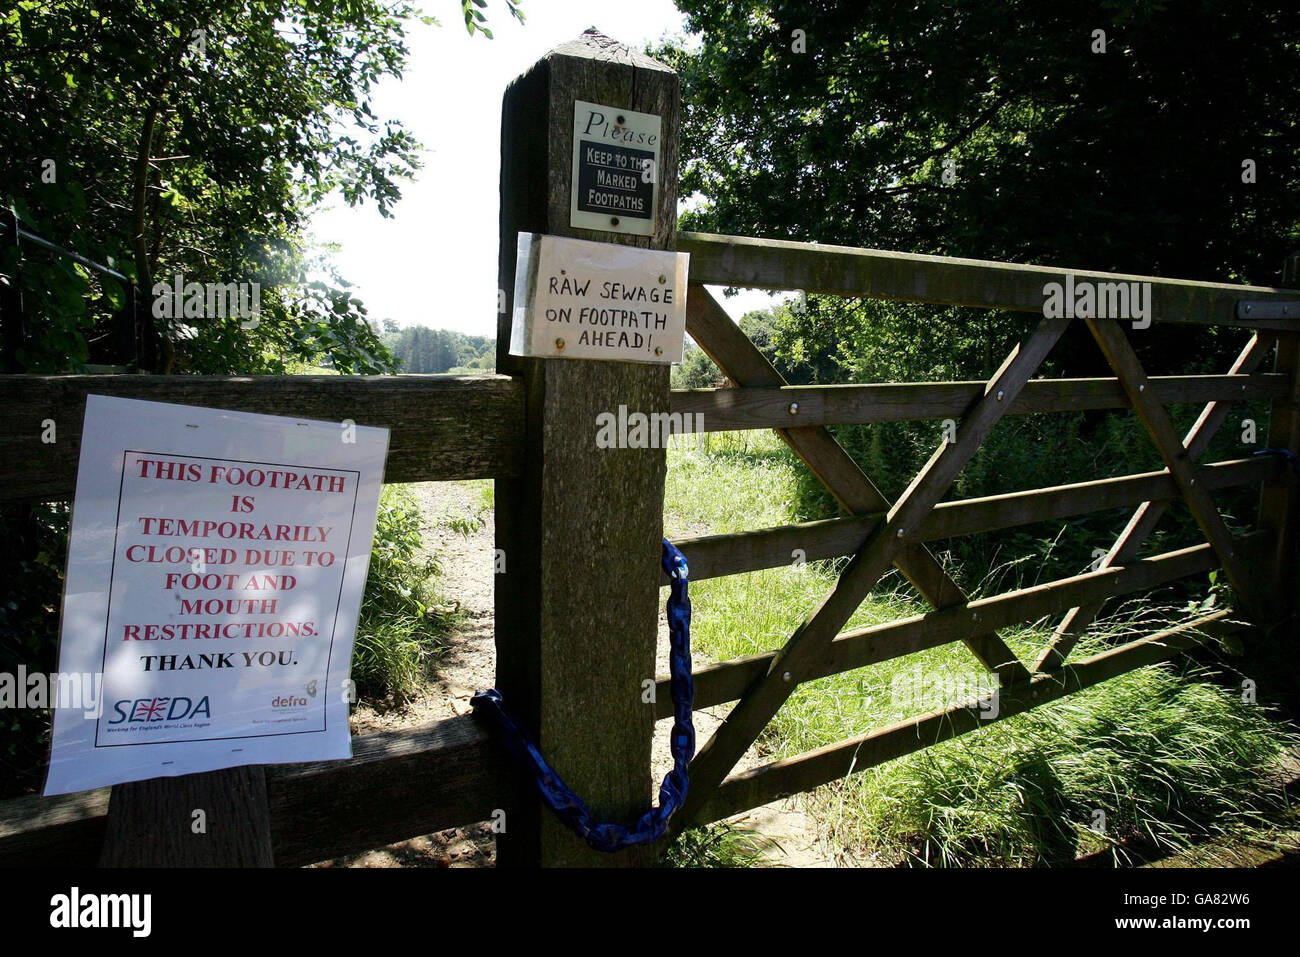 Signs warn of suspected outbreaks of Foot and Mouth disease in rural areas in Guildford, Surrey, following an outbreak of Foot and Mouth disease at a nearby farm. Stock Photo